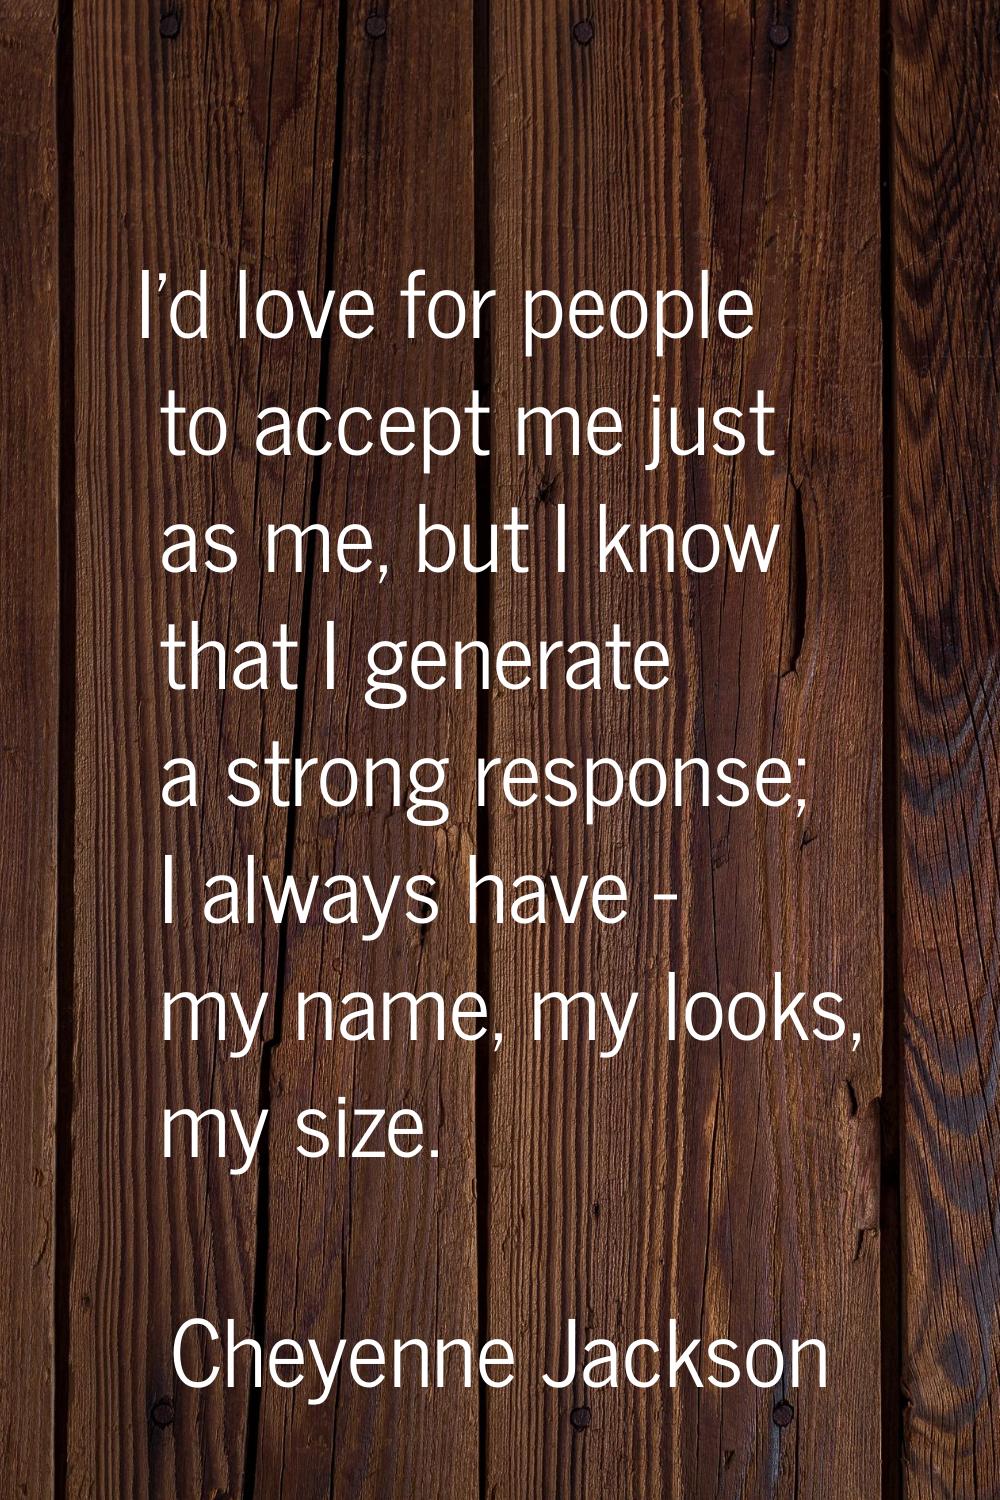 I'd love for people to accept me just as me, but I know that I generate a strong response; I always